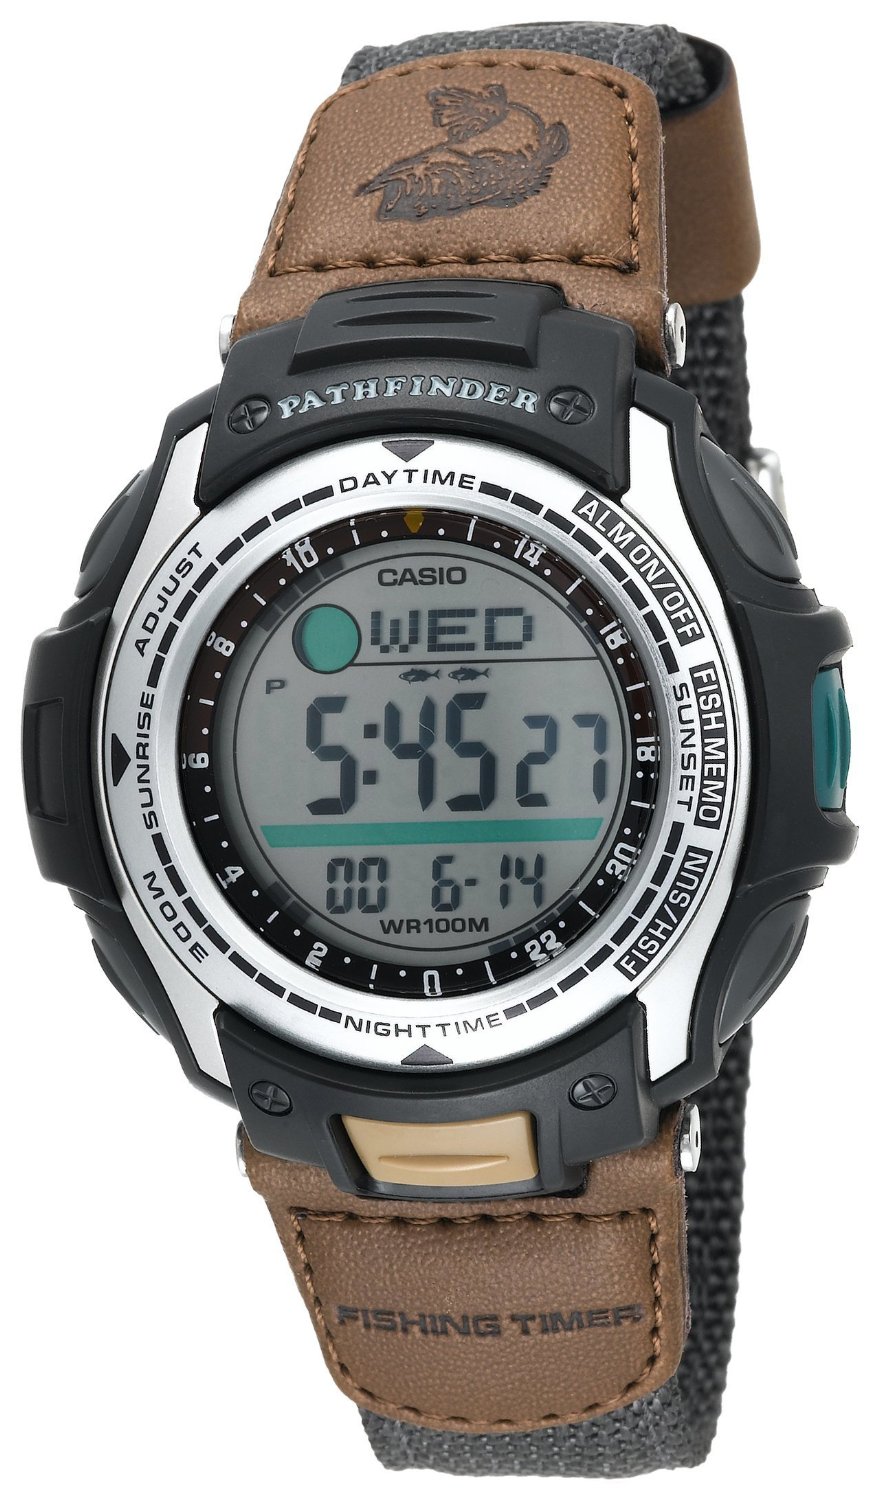 Casio Men's PAS400B-5V Pathfinder Forester Fishing Moon Phase Watch